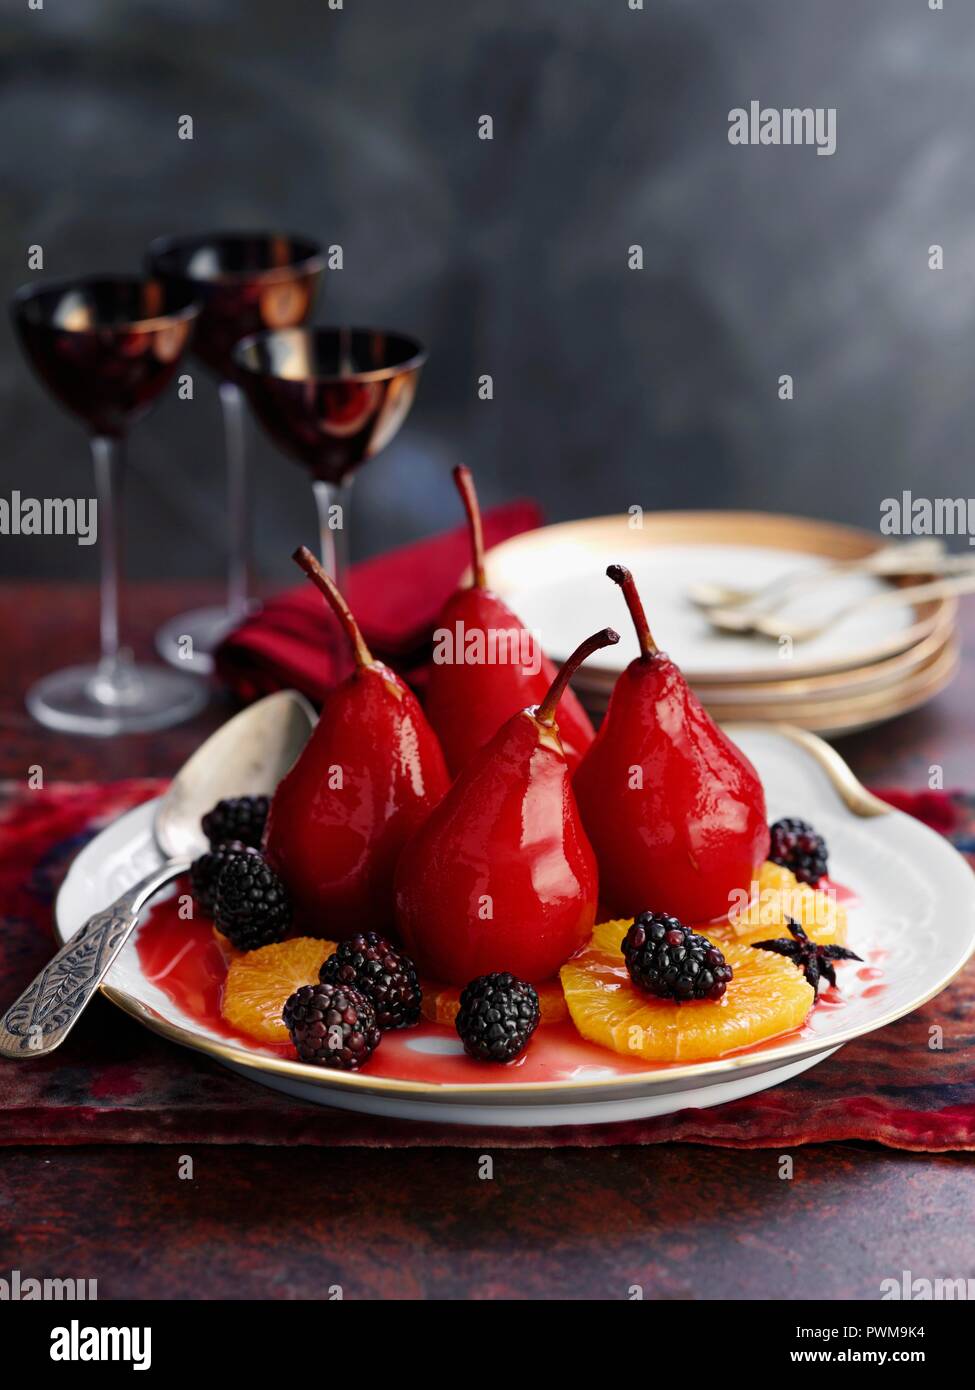 Poached red wine pairs with blackberries and orange slices Stock Photo